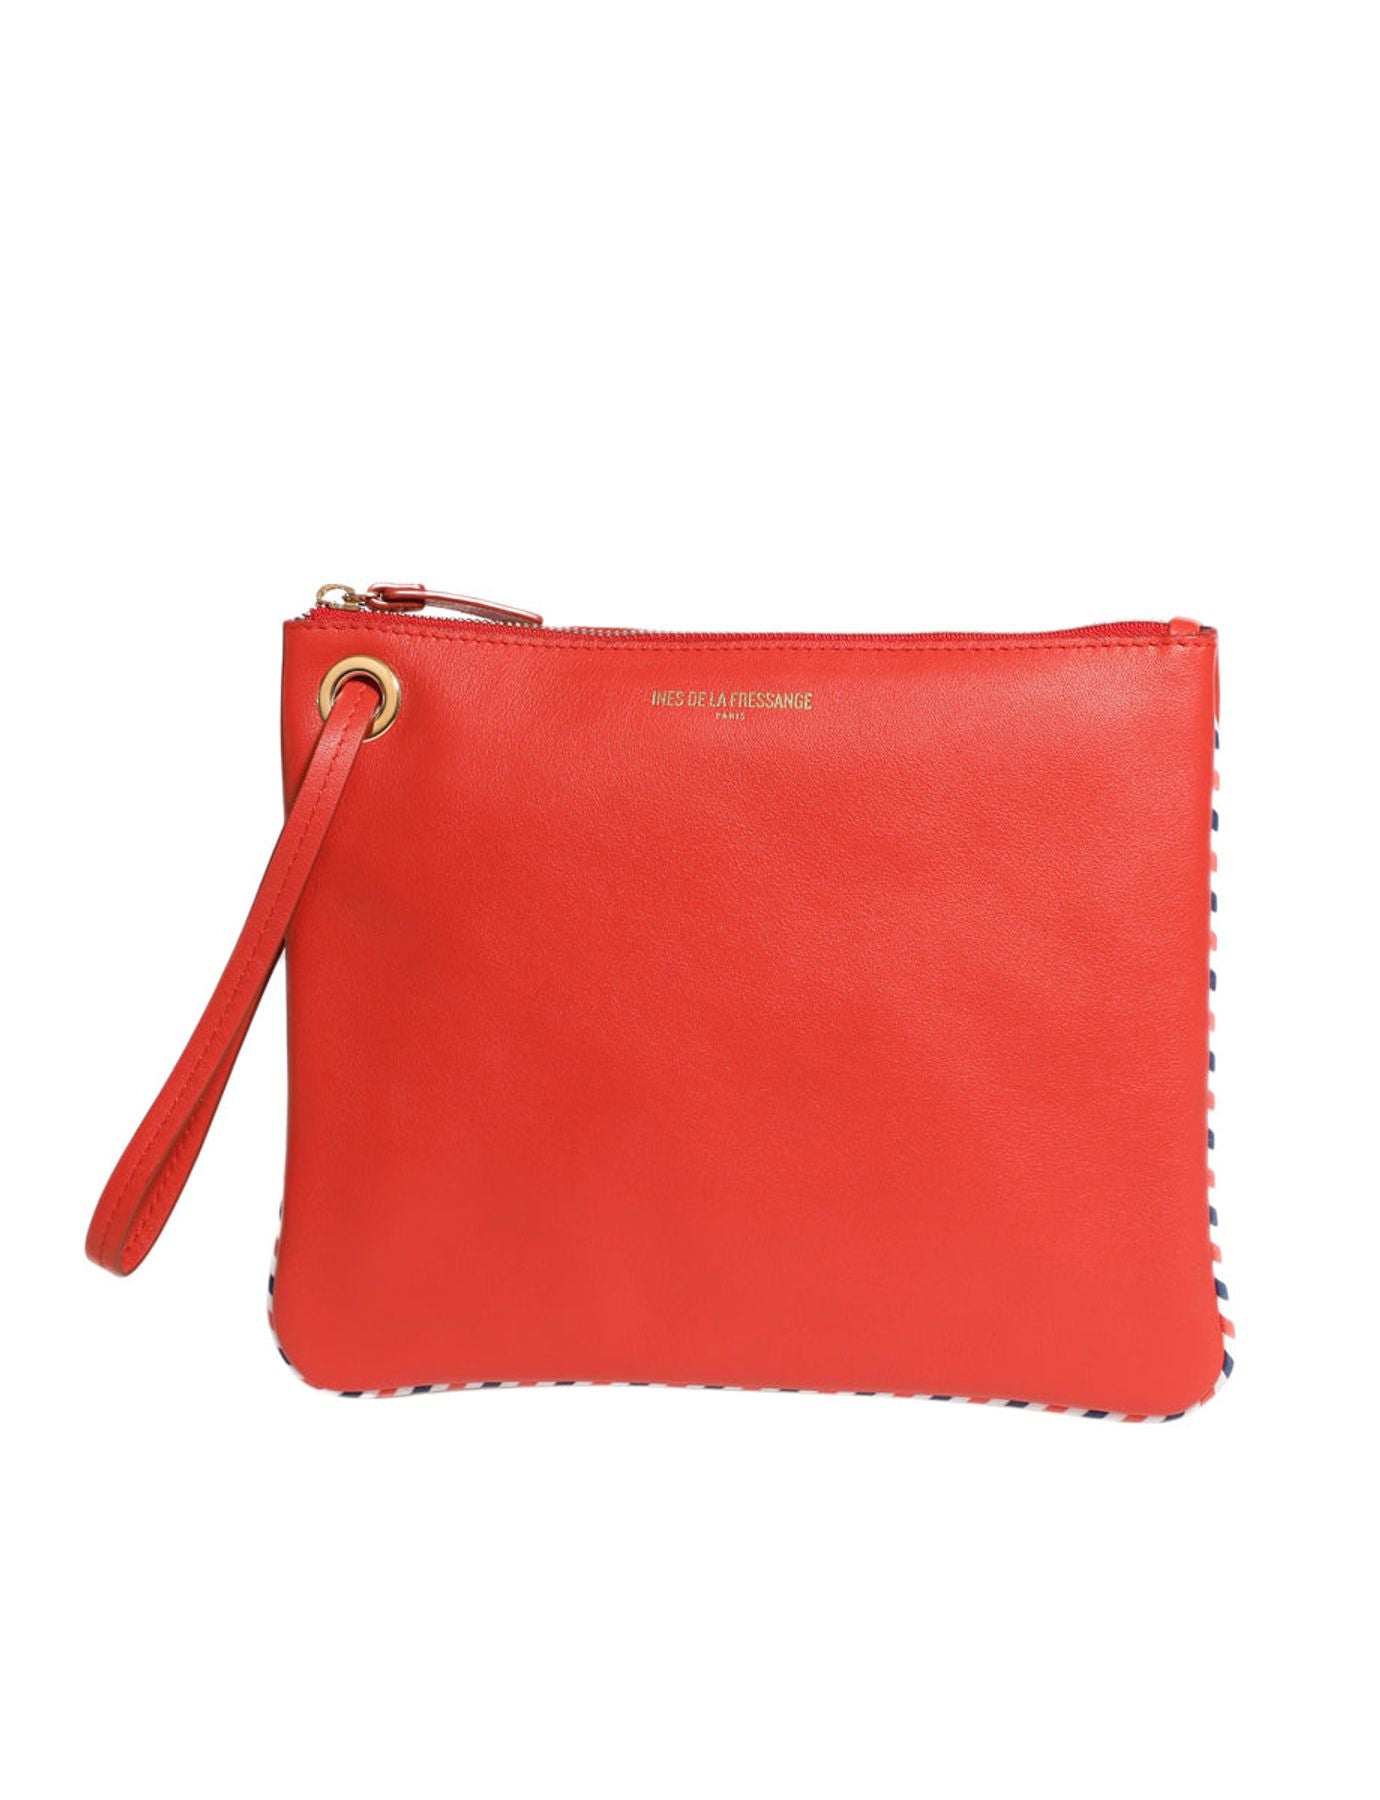 marcia-m-in-leather-red pouch